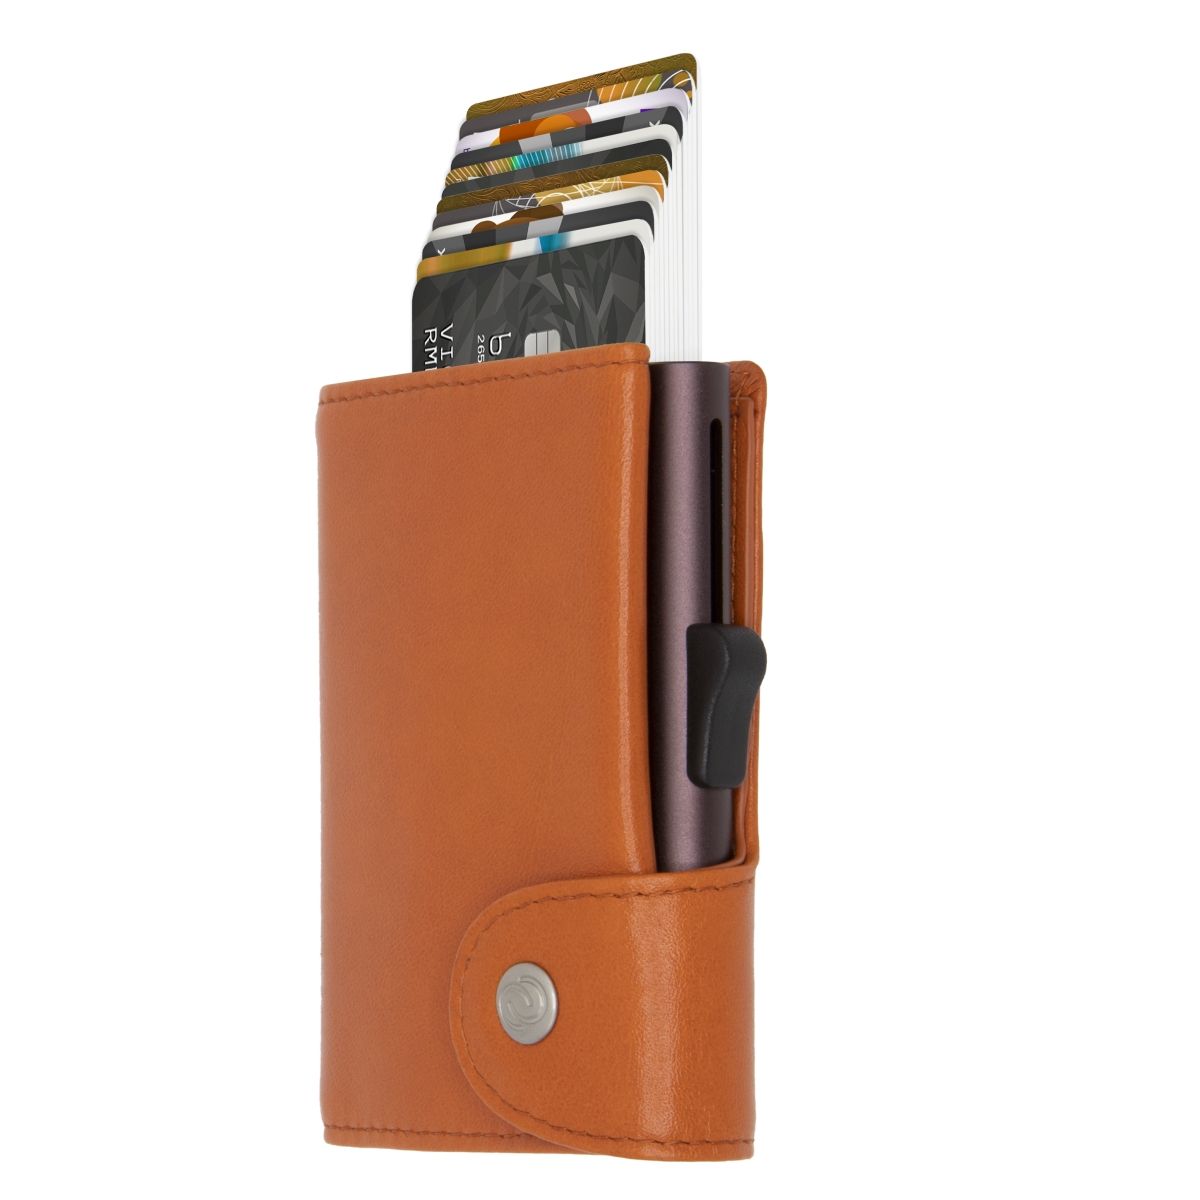 C-Secure XL Aluminum Wallet with Vegetable Genuine Leather - Brown Macchiato